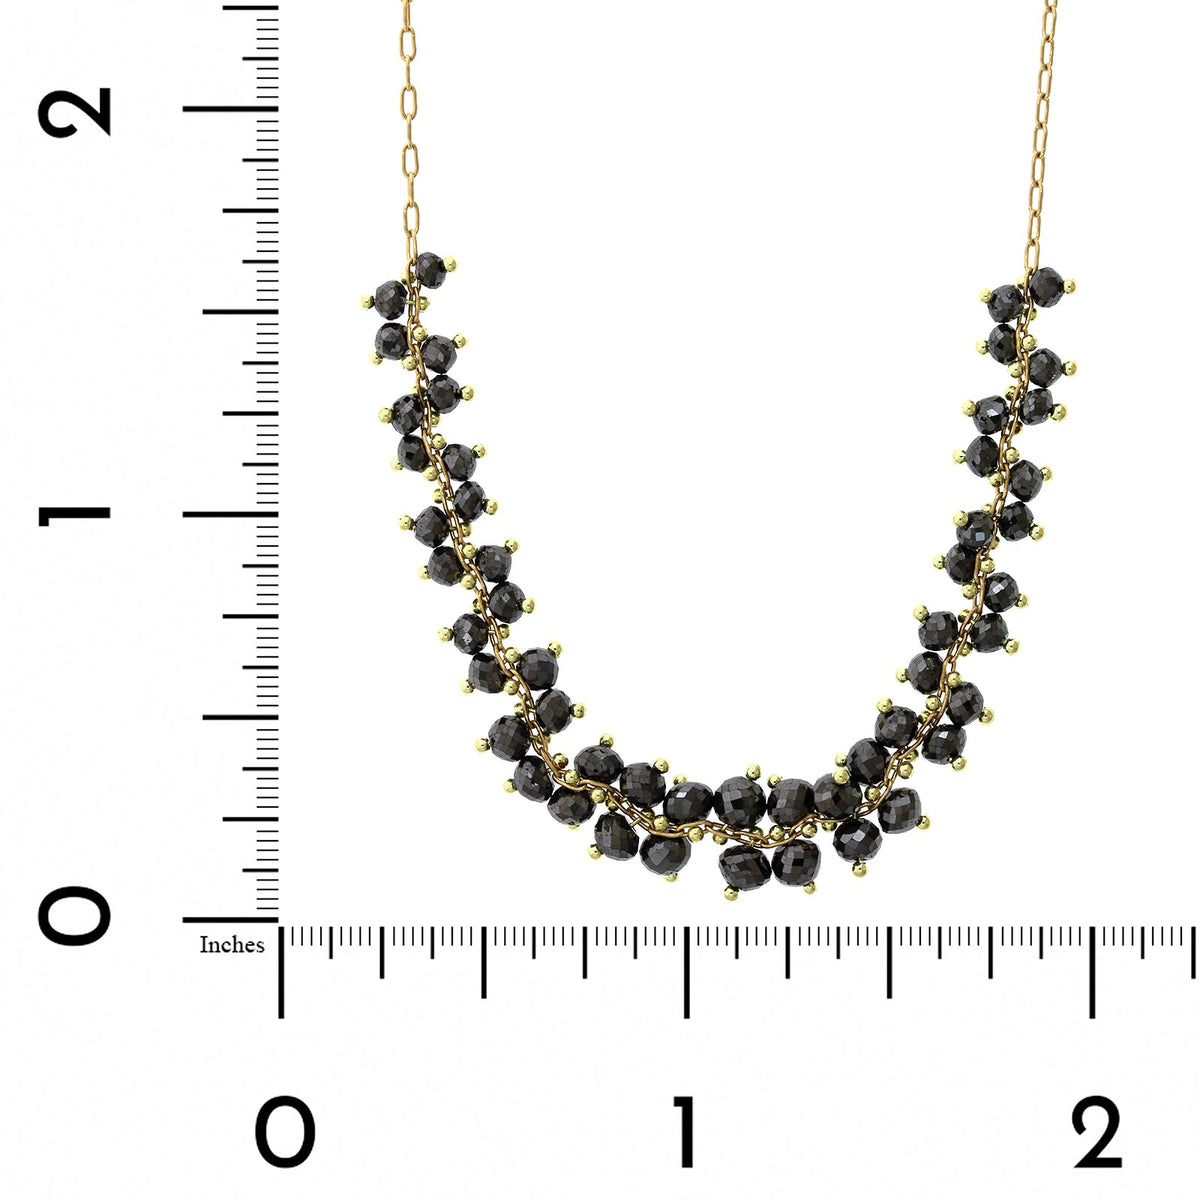 18K Yellow Gold Cluster Black Diamond Bead Necklace, 18k yellow gold, Long's Jewelers